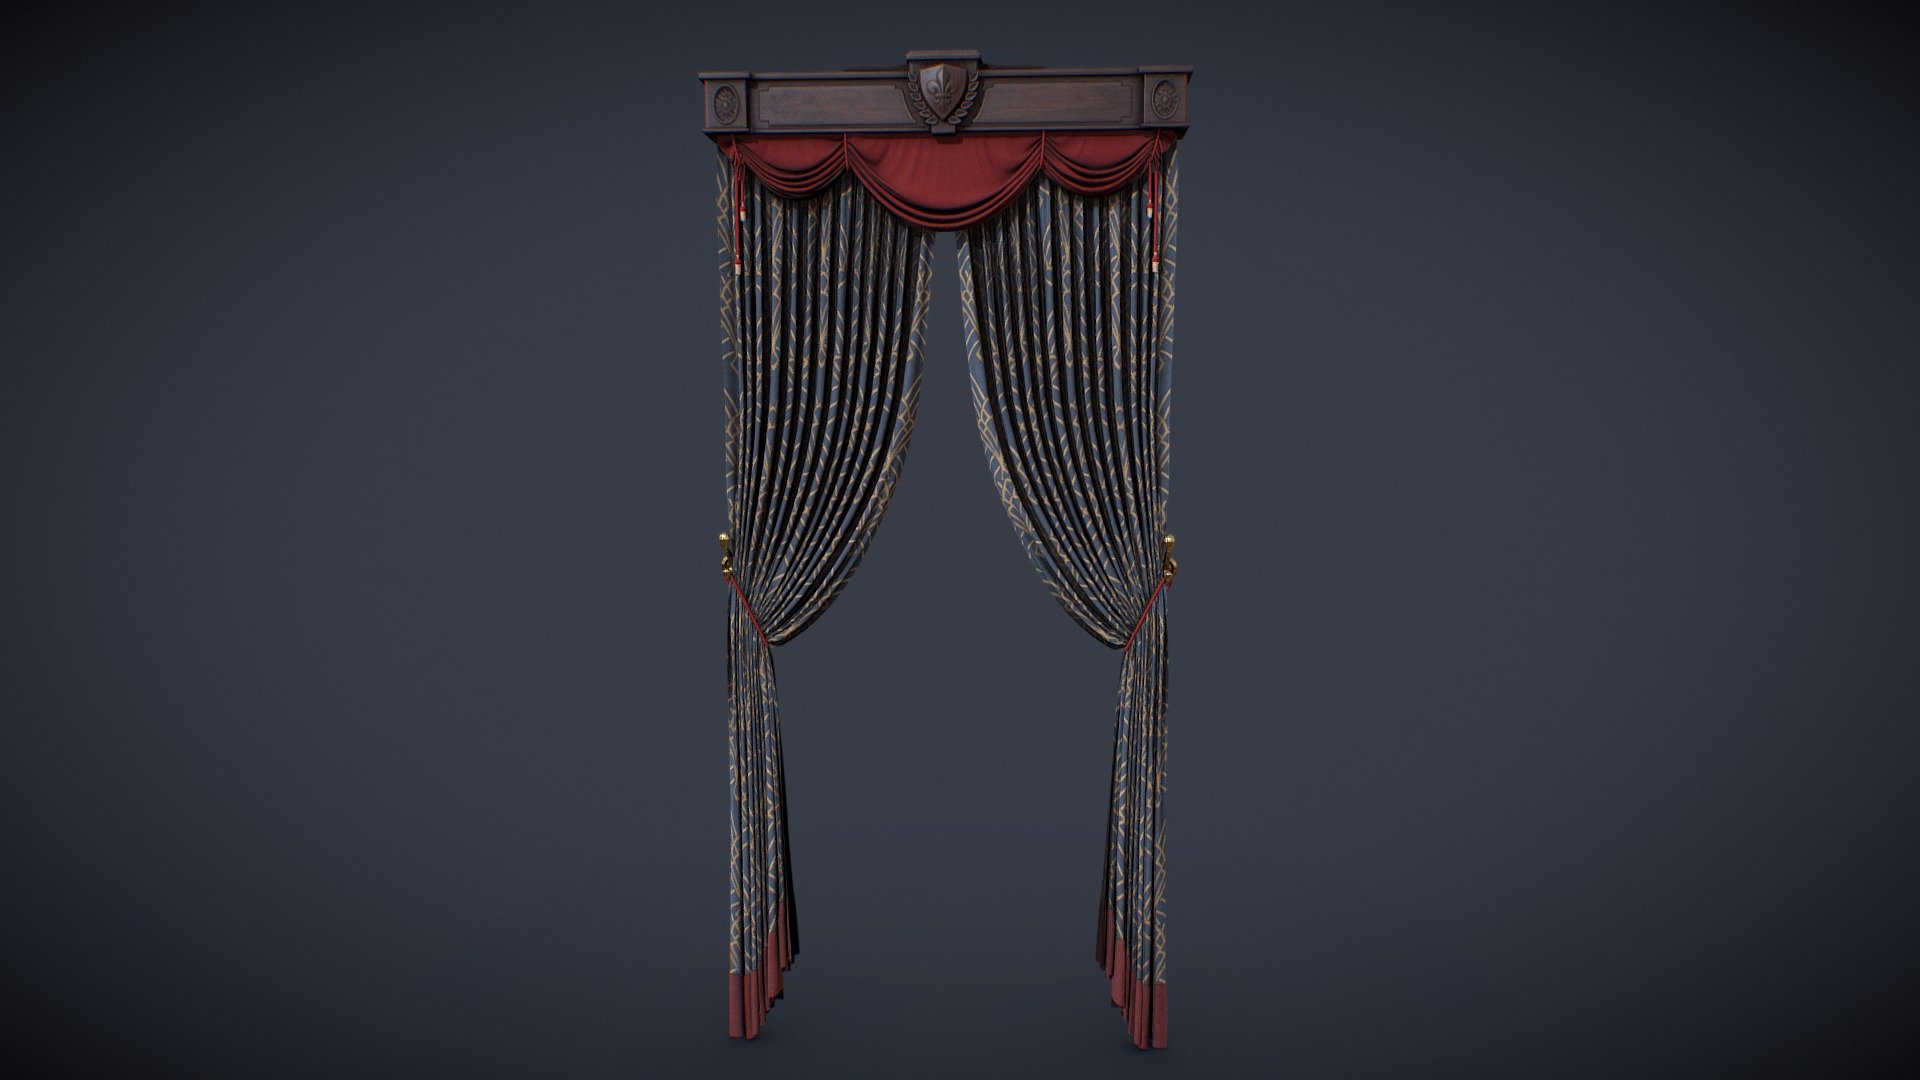 Hello all :) This is a long curtain asset to cover windows for a victorian project. Blue and red fabrics and wood base.

Made with Maya, PS and Substance.

You will find in the package Scene file, FBX and 2k Textures.
If you have any customs need, please feel free to contact me 3d model